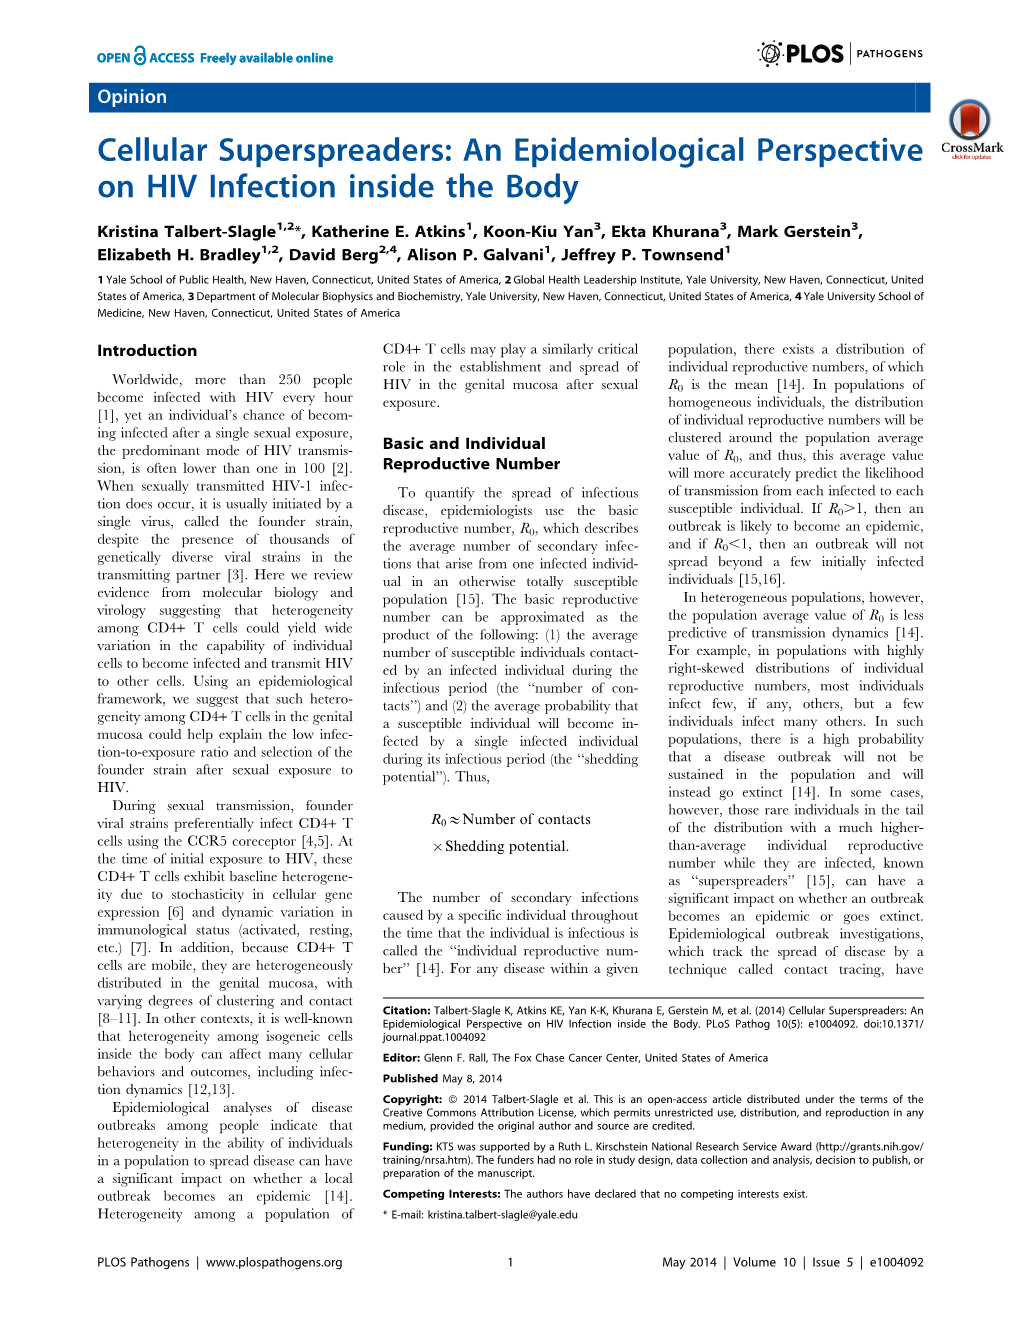 Cellular Superspreaders: an Epidemiological Perspective on HIV Infection Inside the Body